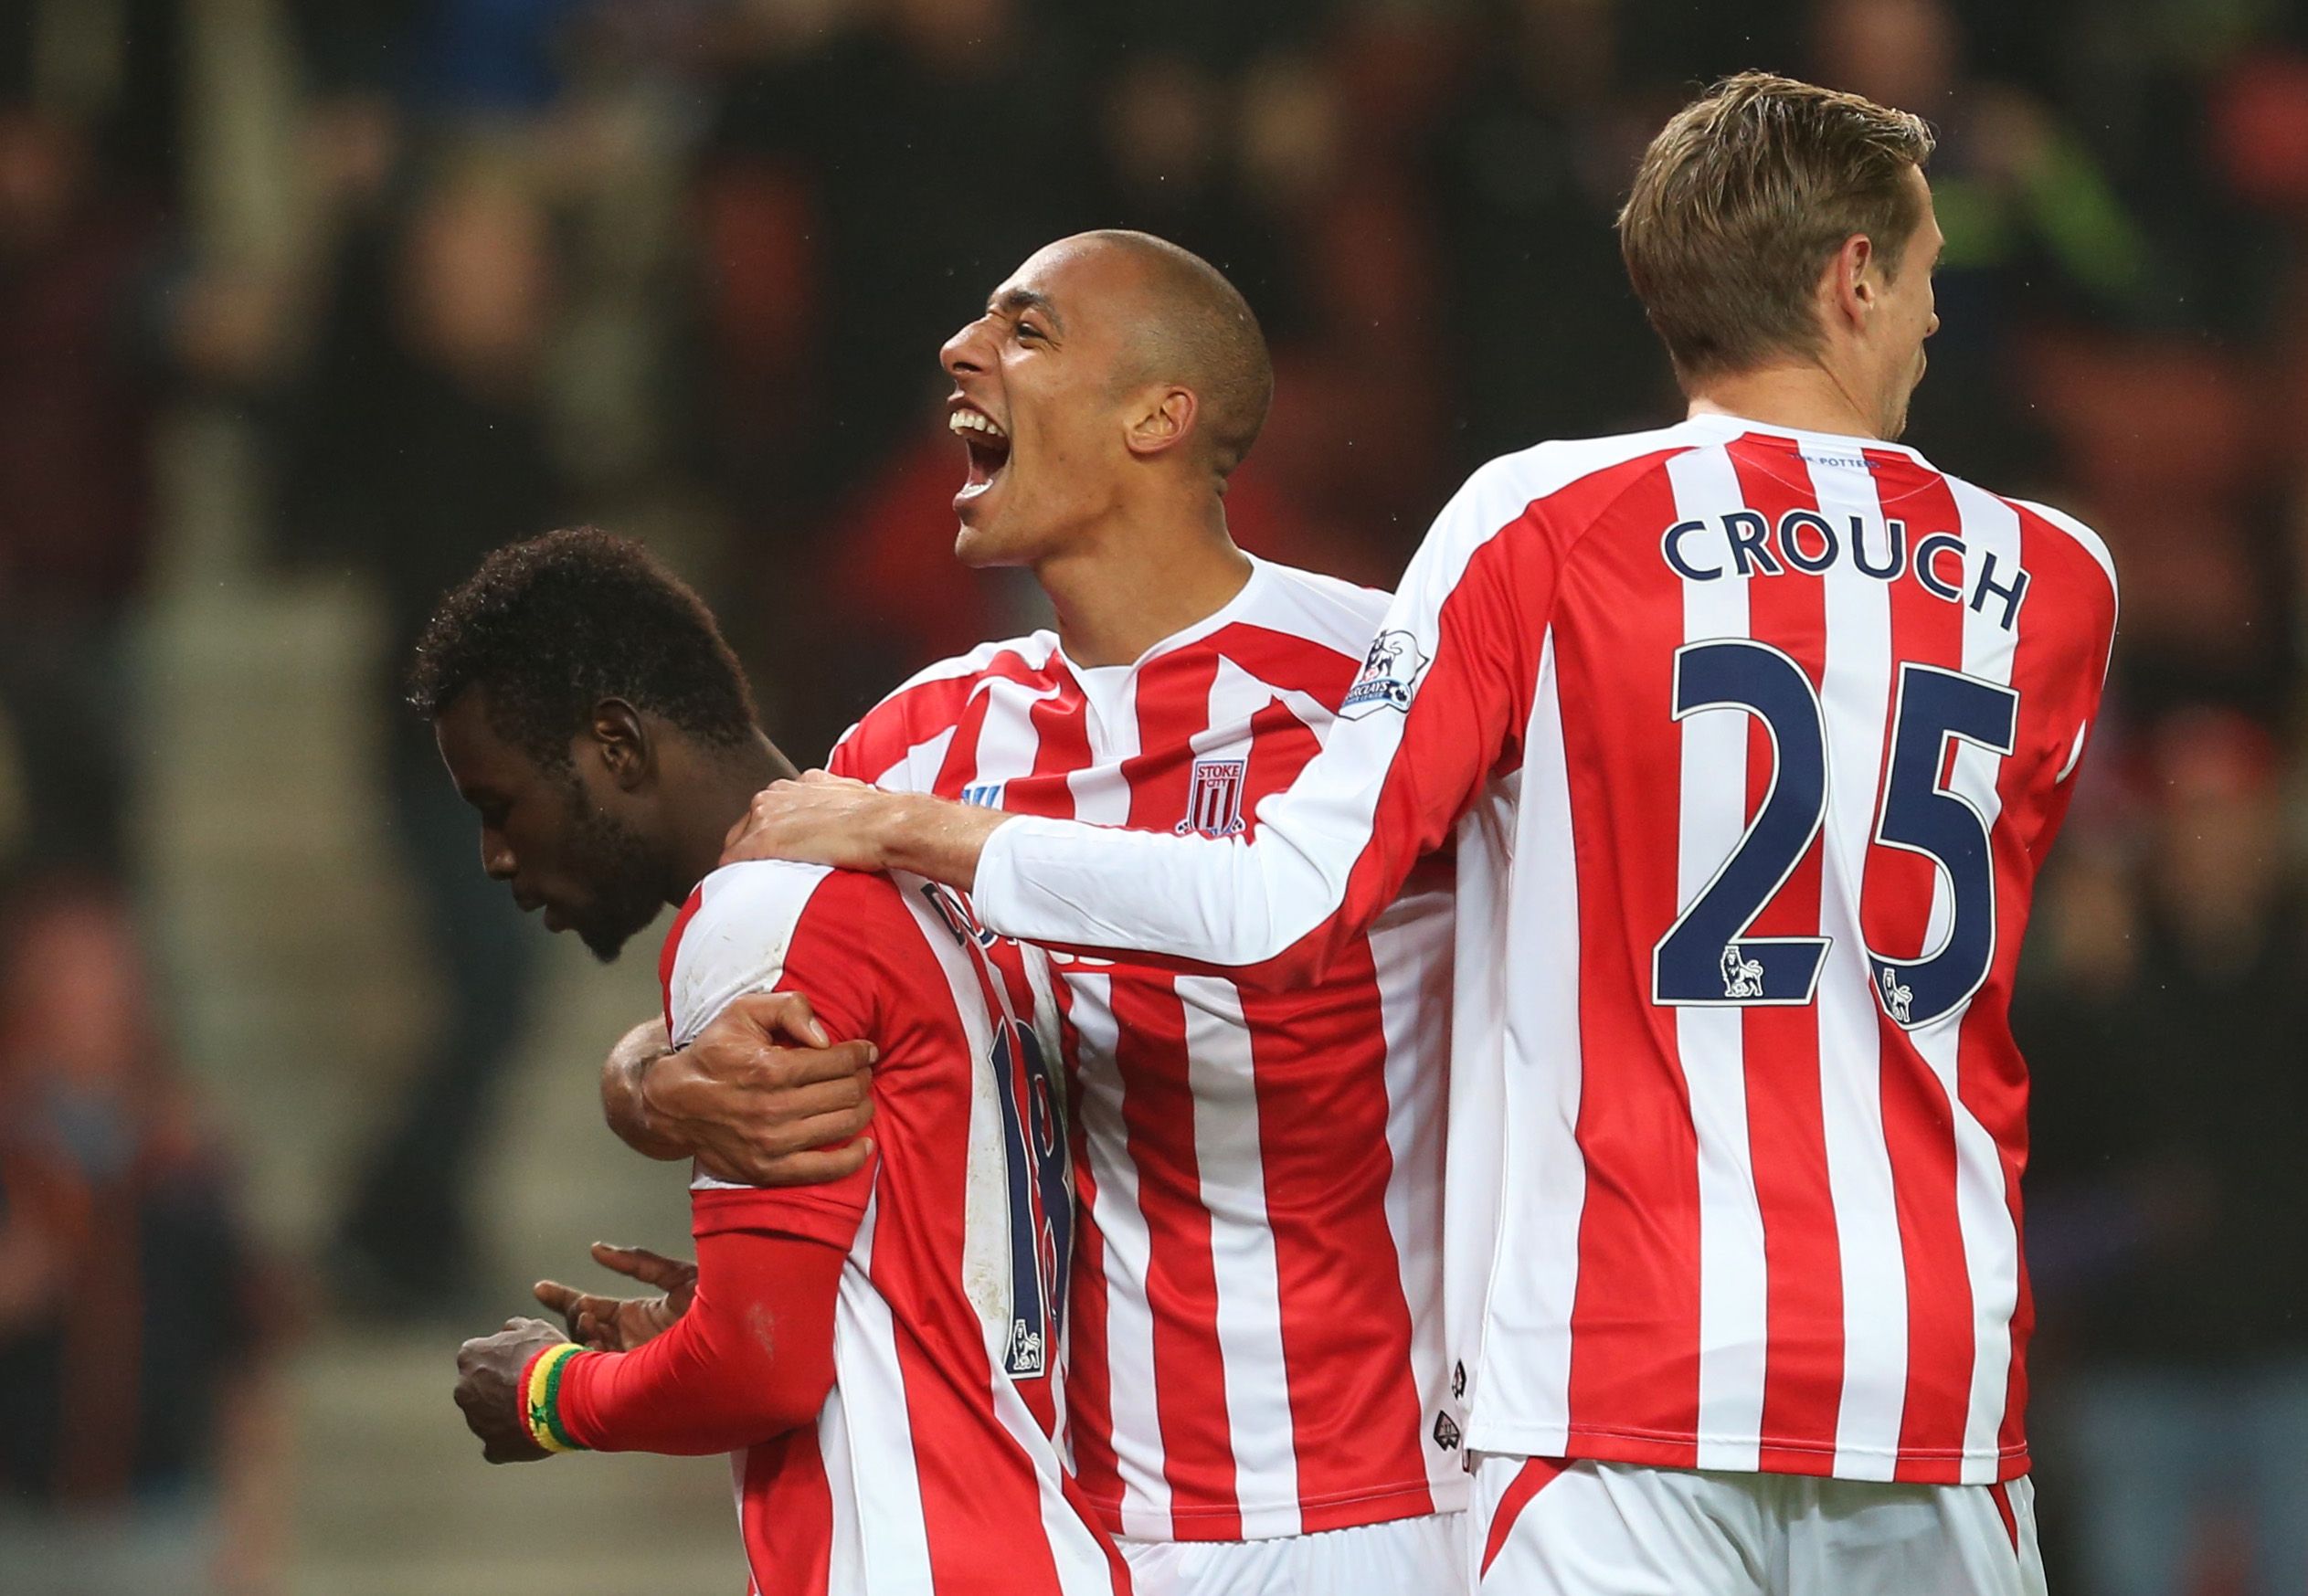 Football - Stoke City v Southampton - Capital One Cup Fourth Round - Britannia Stadium - 14/15 - 29/10/14 
Stoke City's Mame Biram Diouf (L) celebrates with Steven Nzonzi (C) and Peter Crouch after scoring the second goal 
Mandatory Credit: Action Images / Steven Paston 
EDITORIAL USE ONLY. No use with unauthorized audio, video, data, fixture lists, club/league logos or 